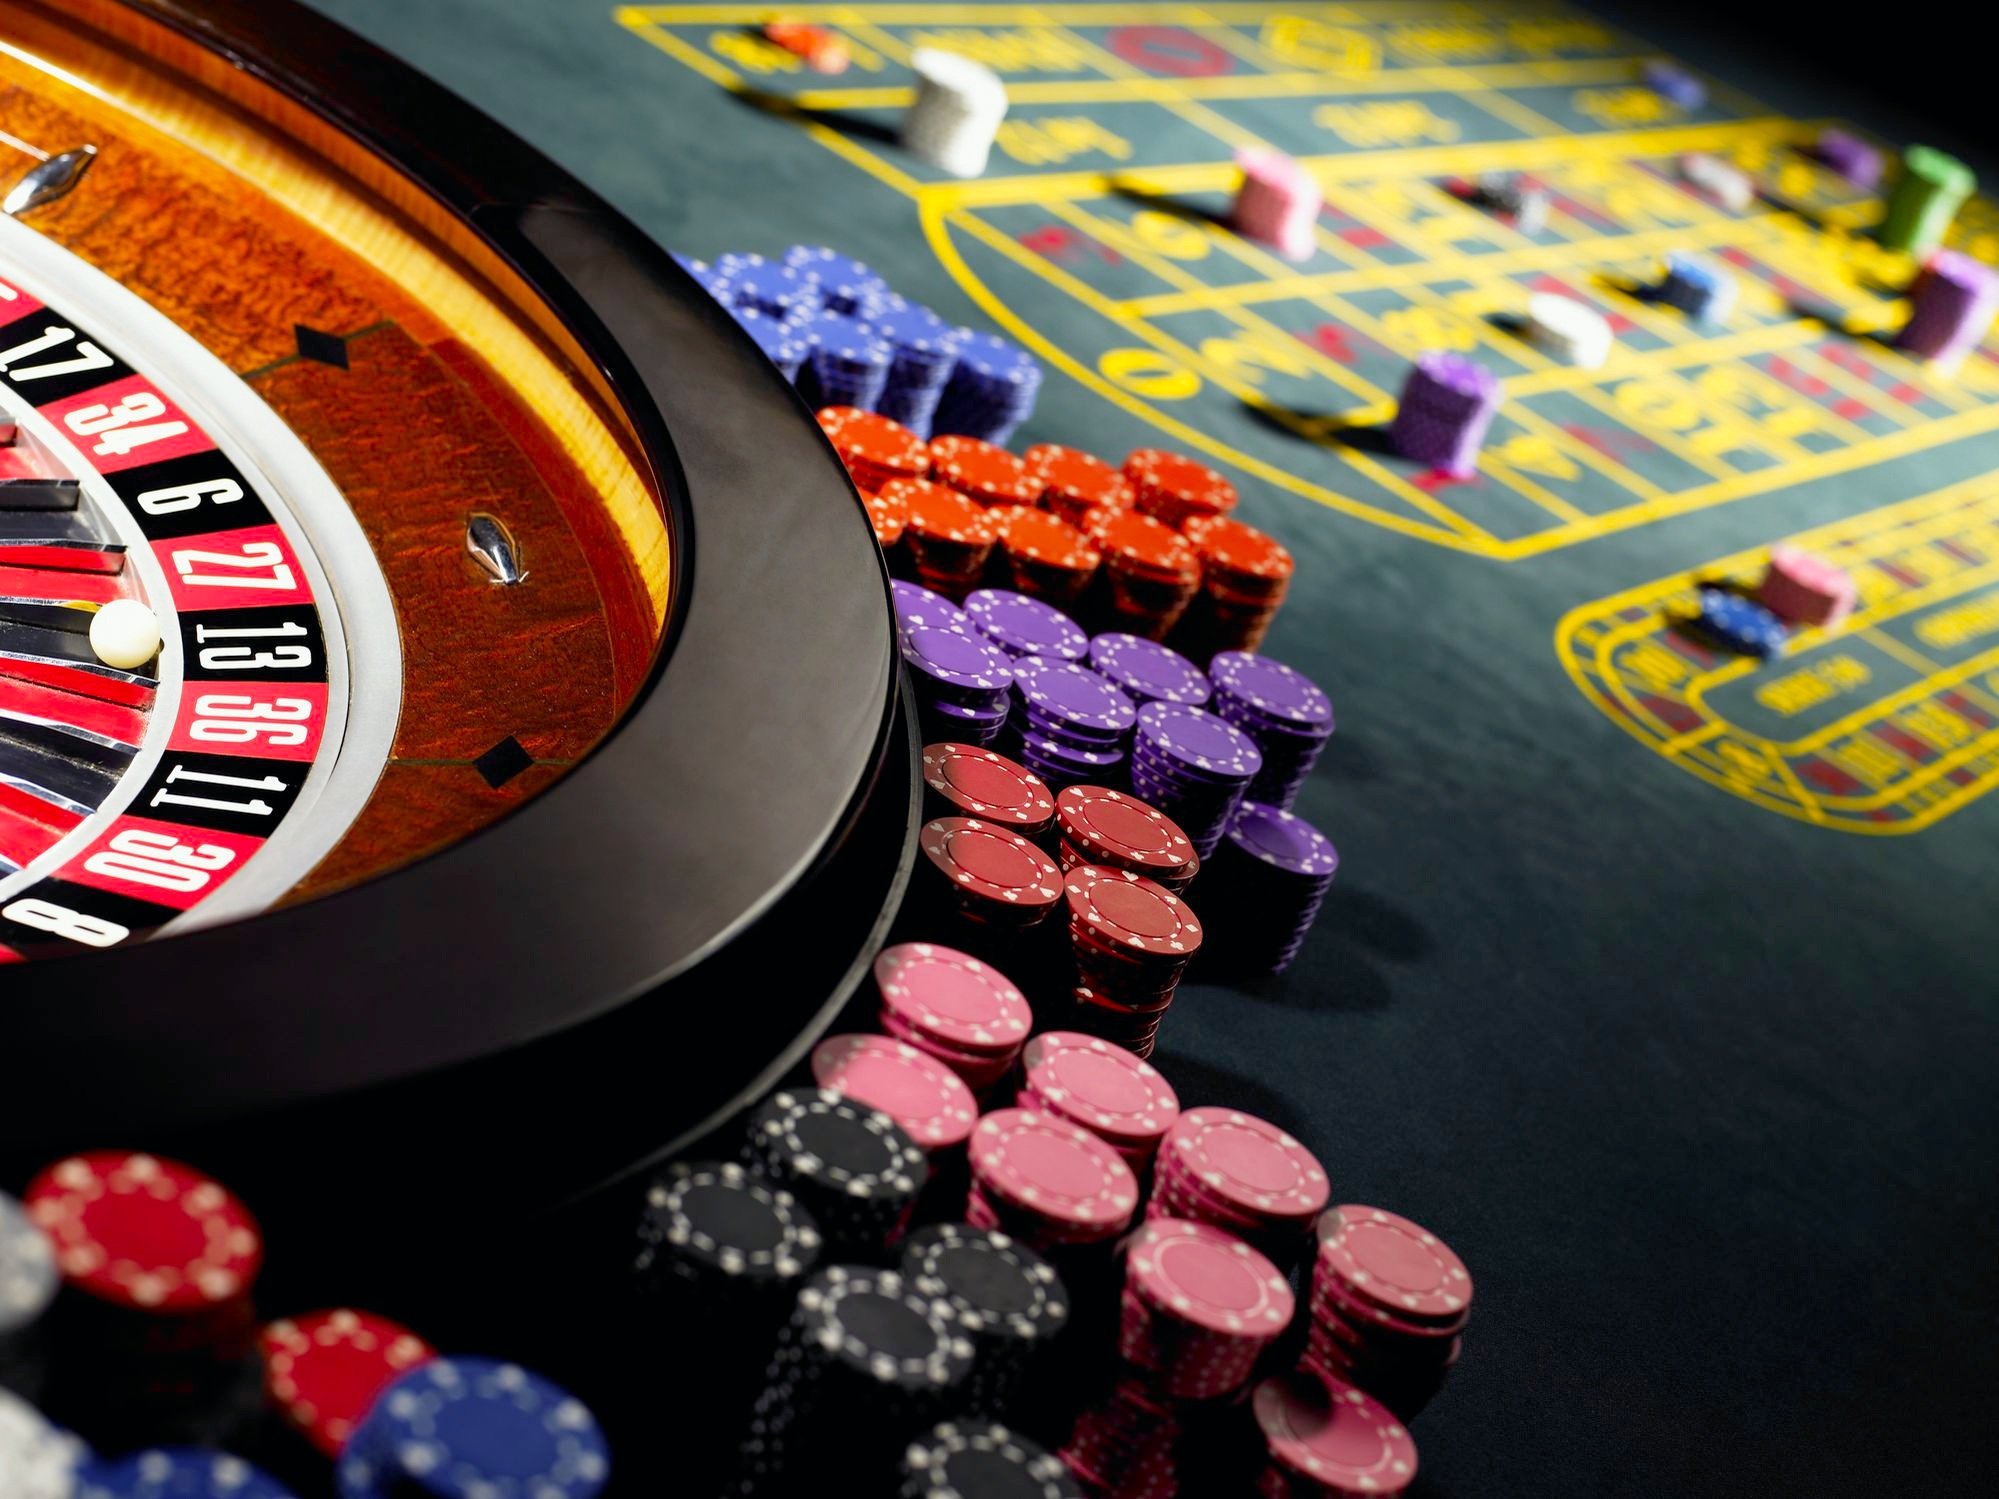 Information related to casino gaming tips for enhancing the level